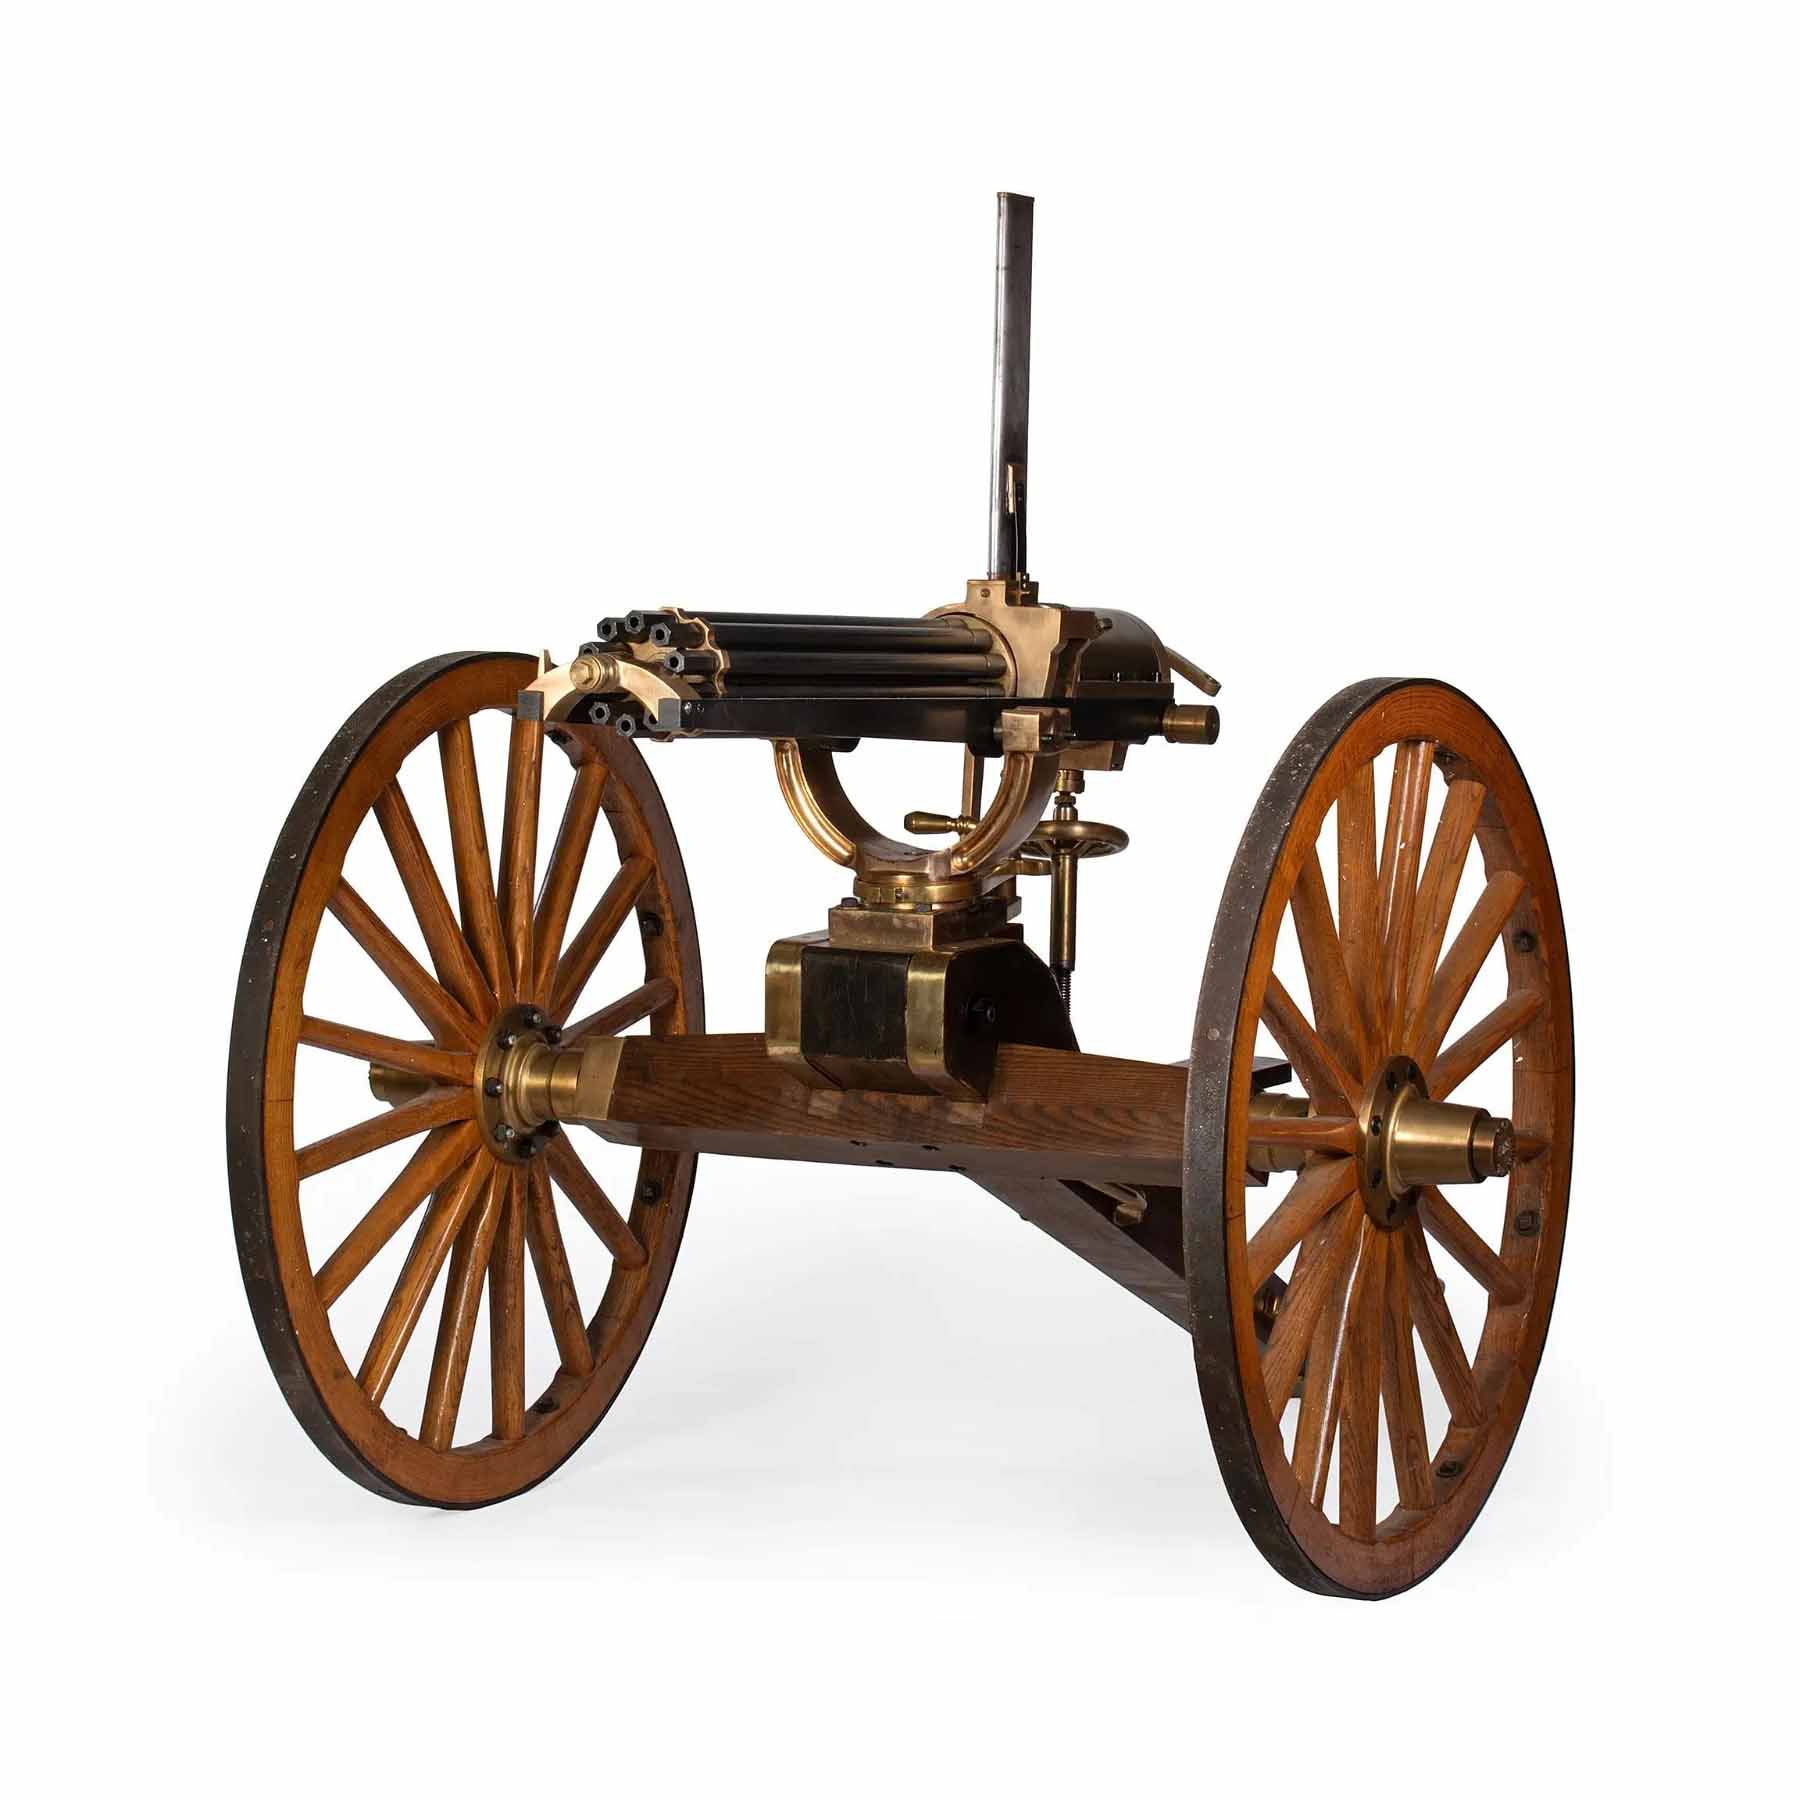 Museum-Quality Reproduction Of An 1876 Gatling Gun And Carriage, estimated at $25,000-$50,000 at Lewis & Grant.